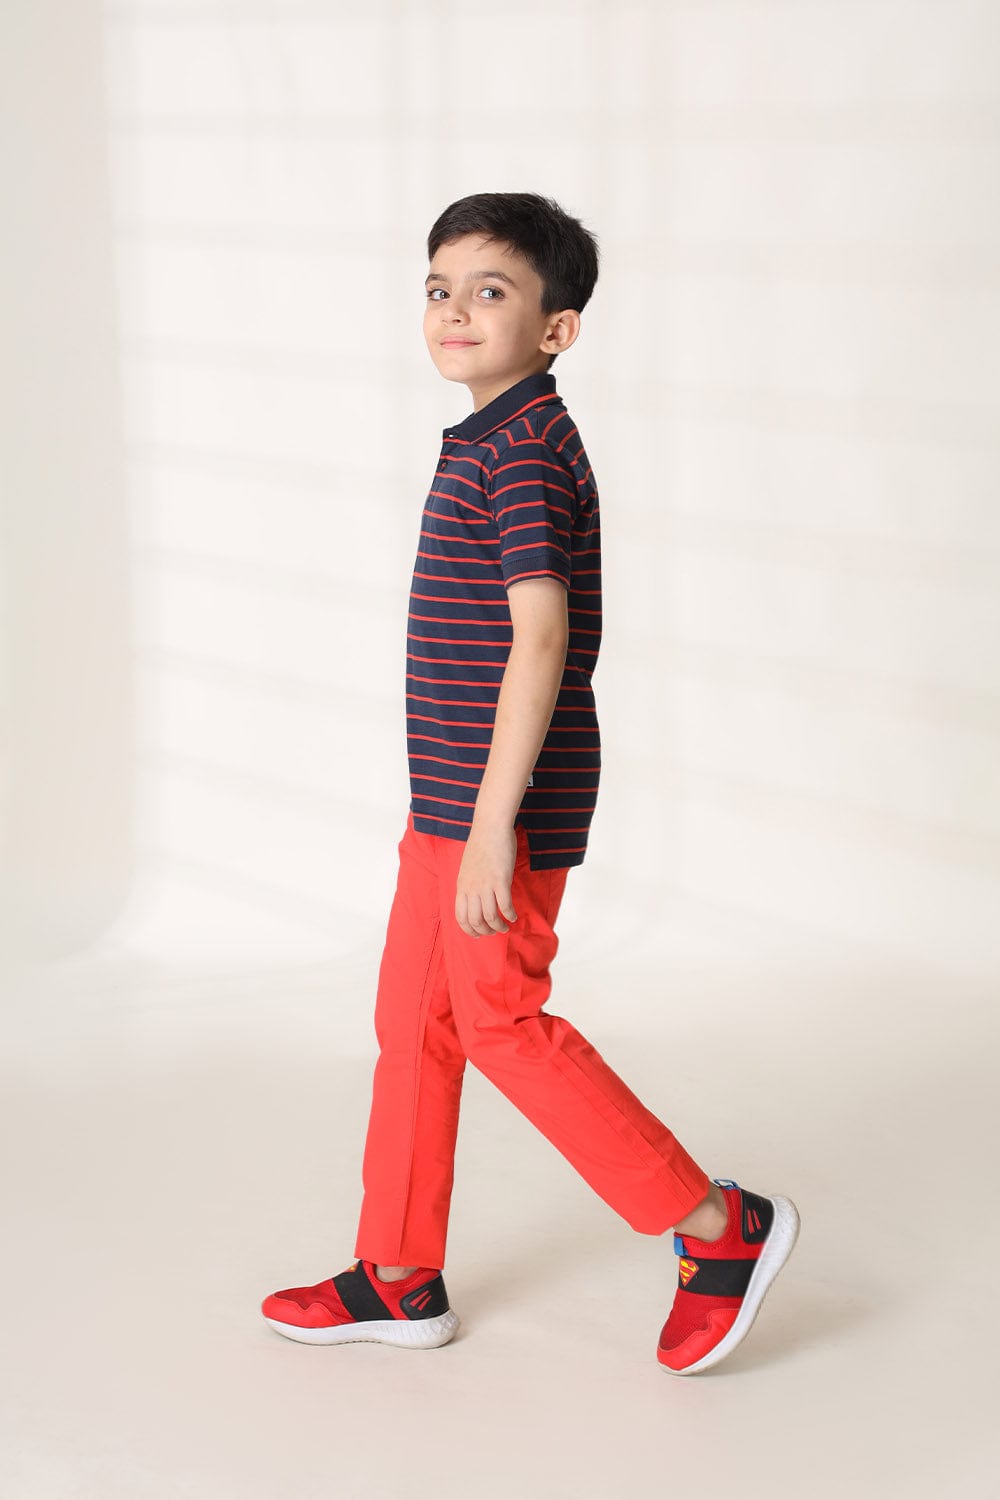 Hope Not Out by Shahid Afridi Boys Knit Polo Shirt Blue And Red Yarn Dyed Polo Shirt